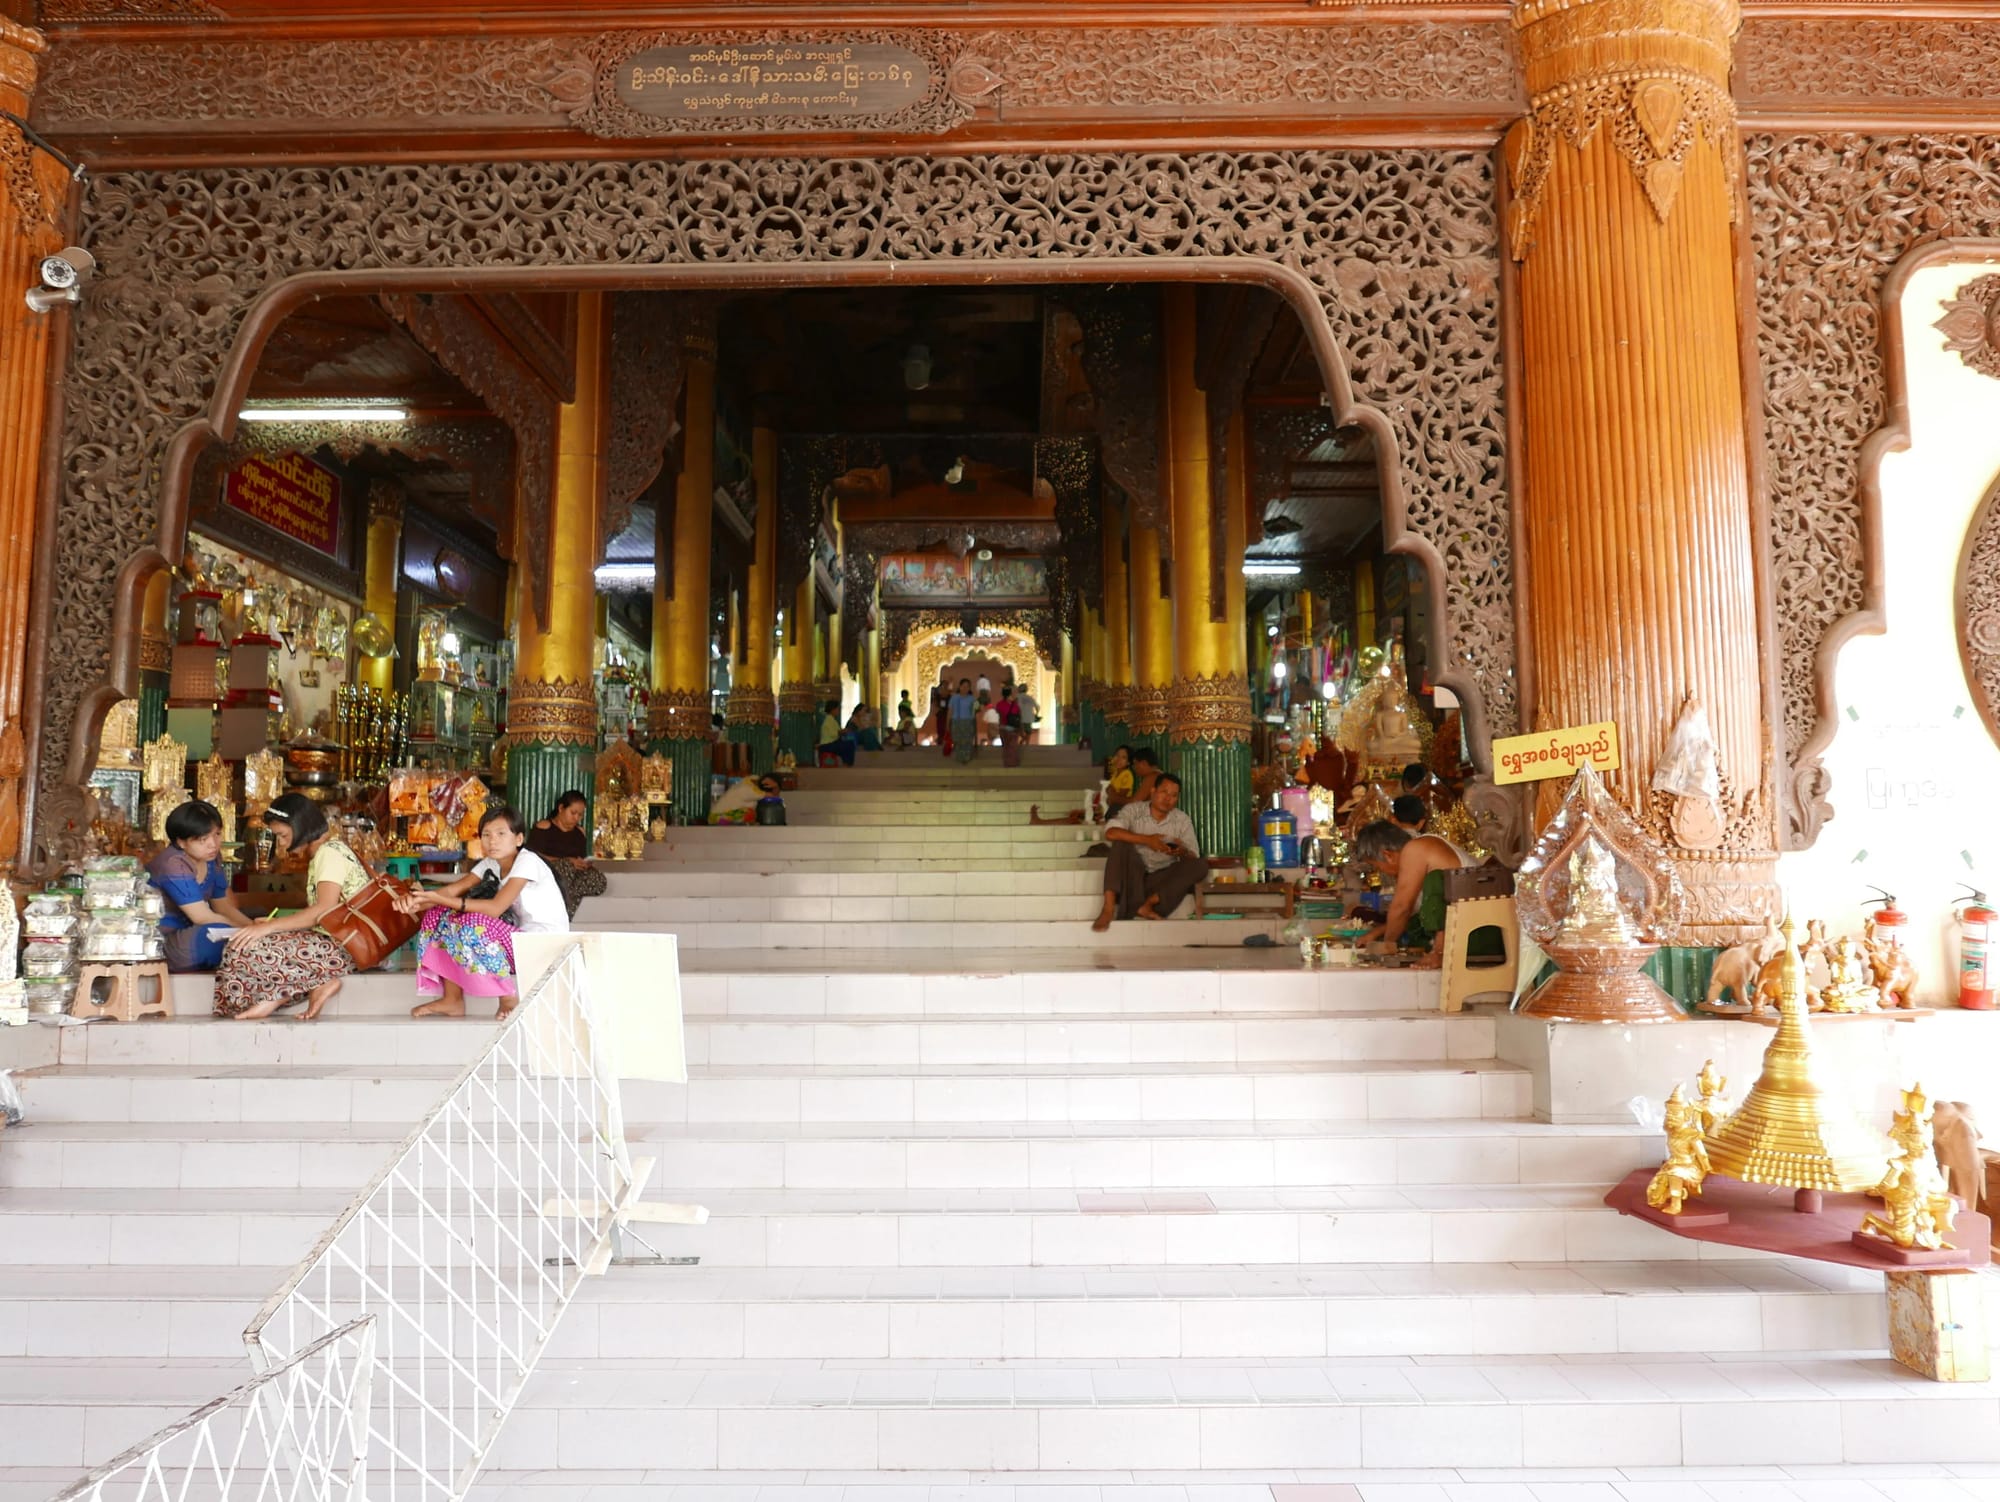 Photo by Author — the main staircase to the pagoda platform